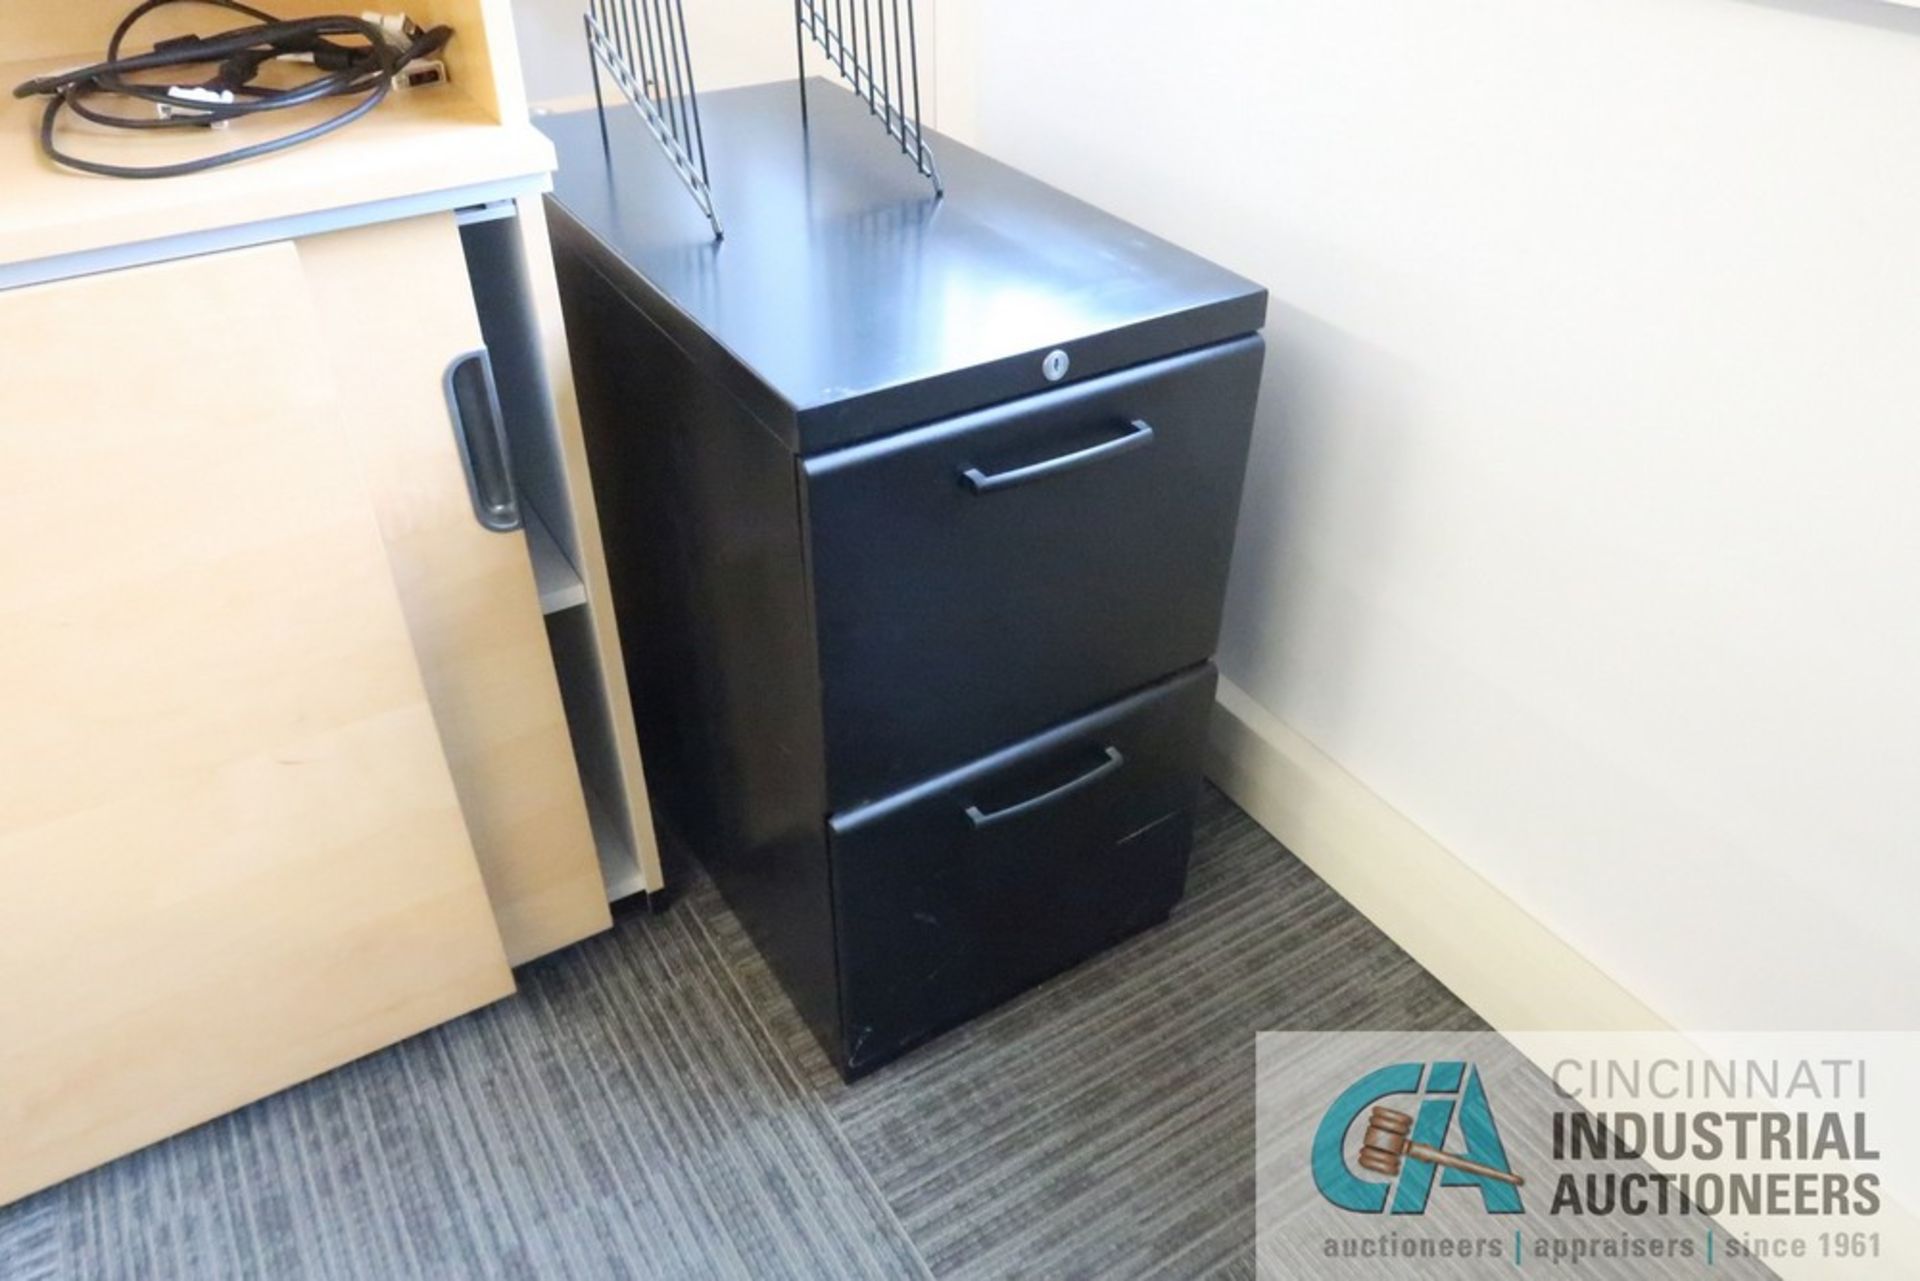 79" X 86" X 24" GALANT L-SHAPED DESKT, (1) 3-DRAWER CABINET, (1) 2-DRAWER CABINET, (1) BOOKCASE WITH - Image 6 of 6